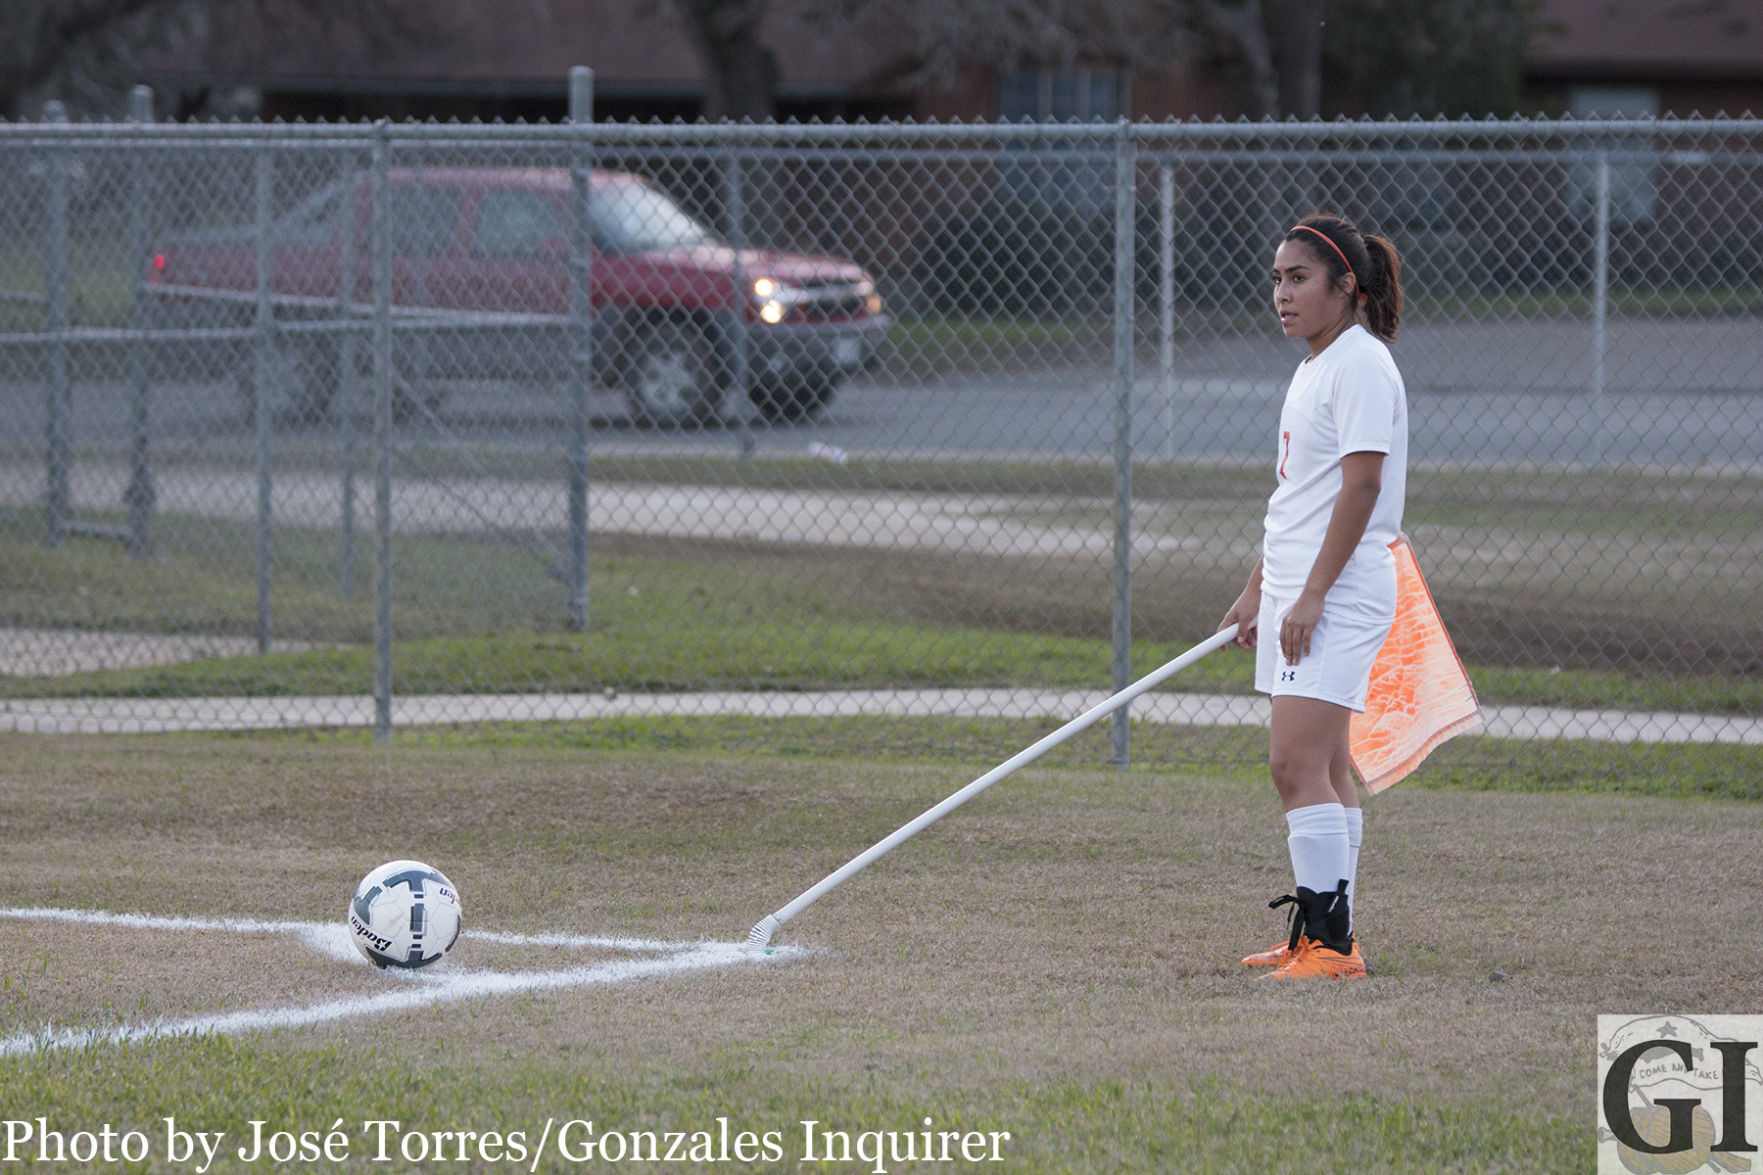 Fernanda Velazquez got her goal in the second half with a blast from outside the box to give the Lady Apaches a 5-0 lead. She added two more to the scoreboard, doing her part in Gonzales’ 7-0 victory over Florence.